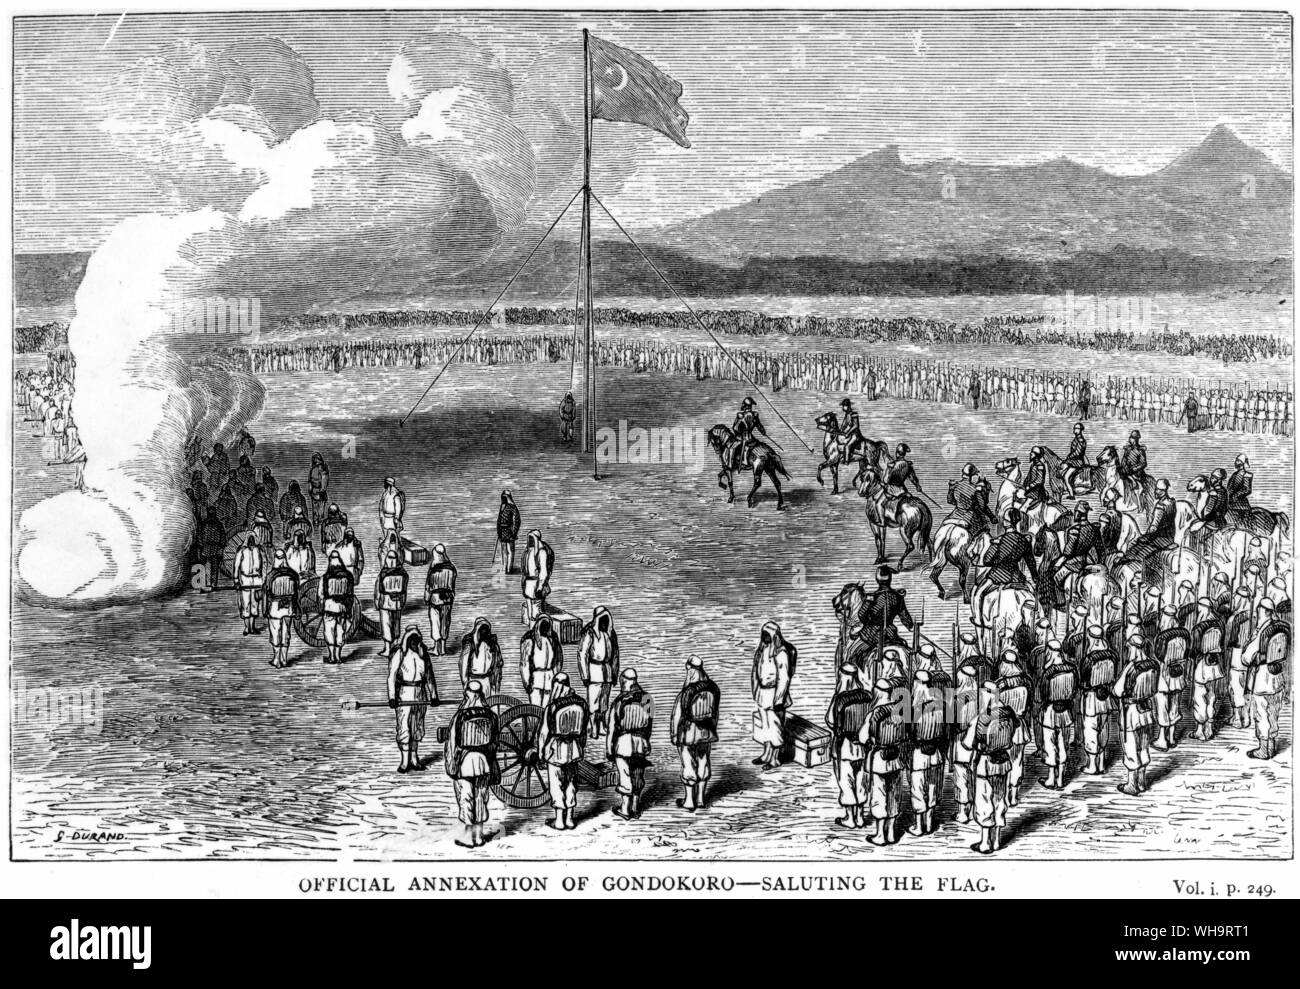 Official annexation of Gondokoro - saluting the flag. From 'Ismailia by Sir Samuel Baker. A narrative of the Expedition to Central Africa for the suppression of the slave trade. May 26th 1871. Stock Photo